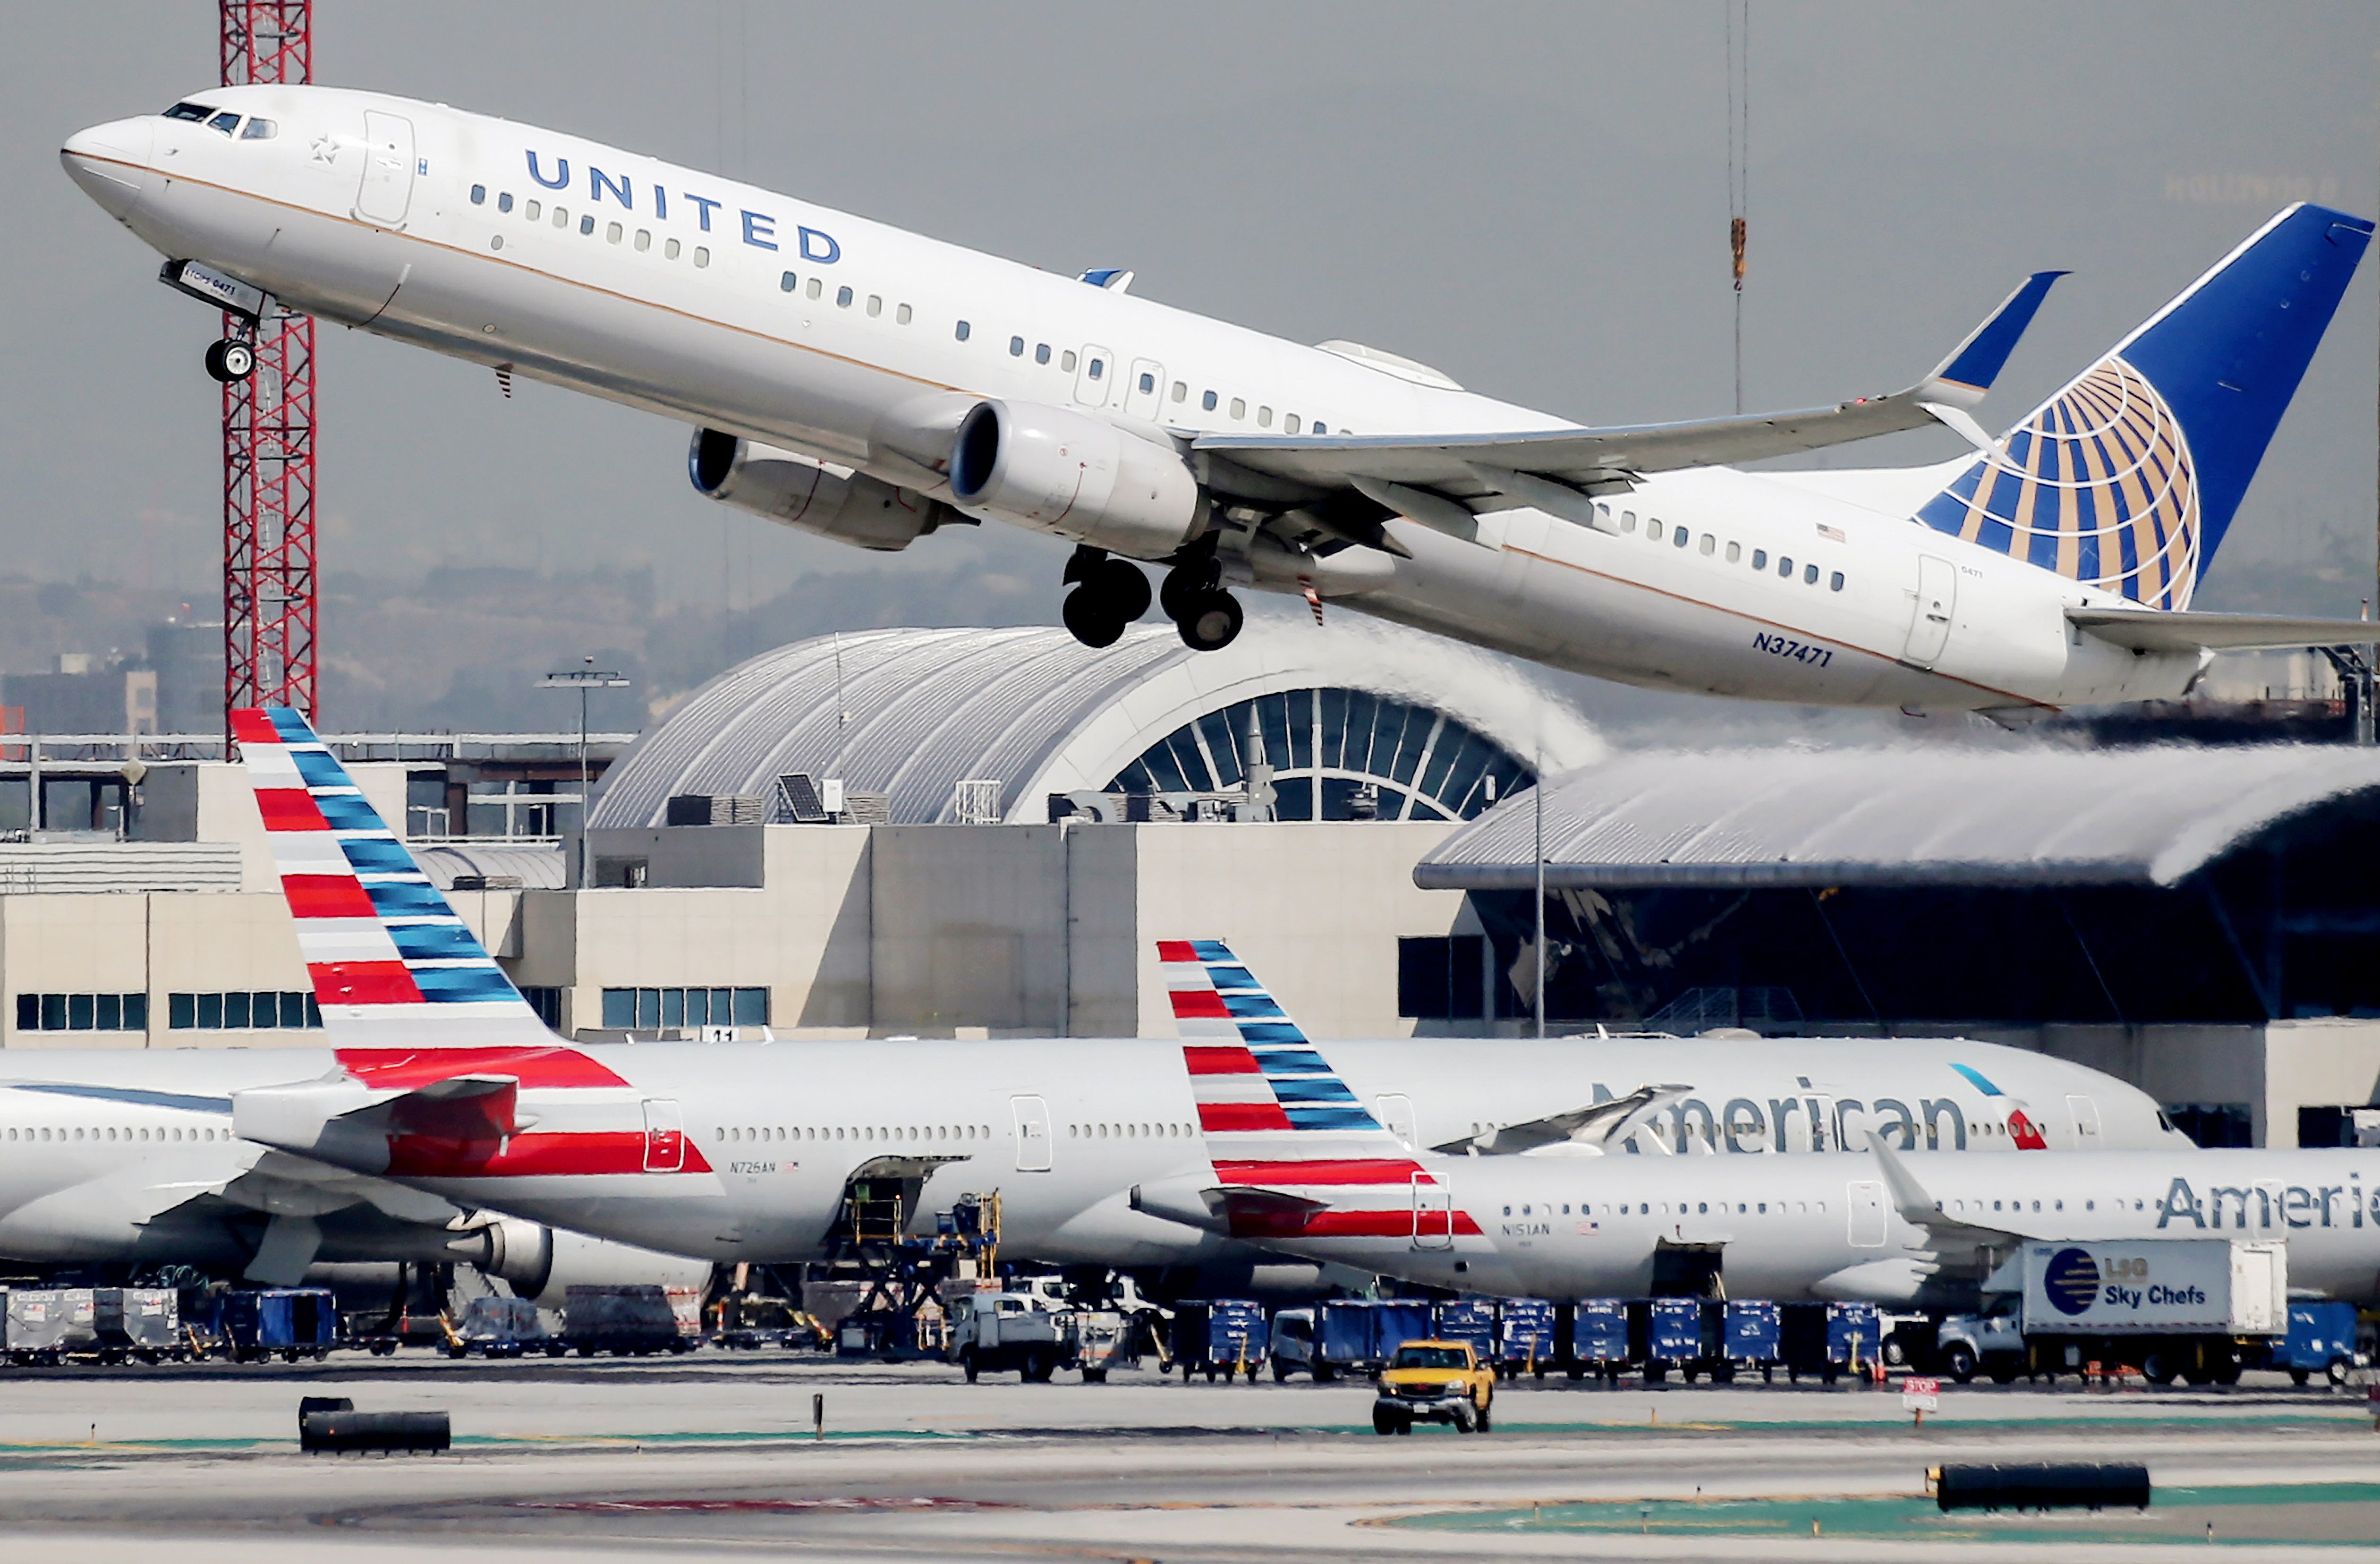 A United Airlines plane takes off above American Airlines planes